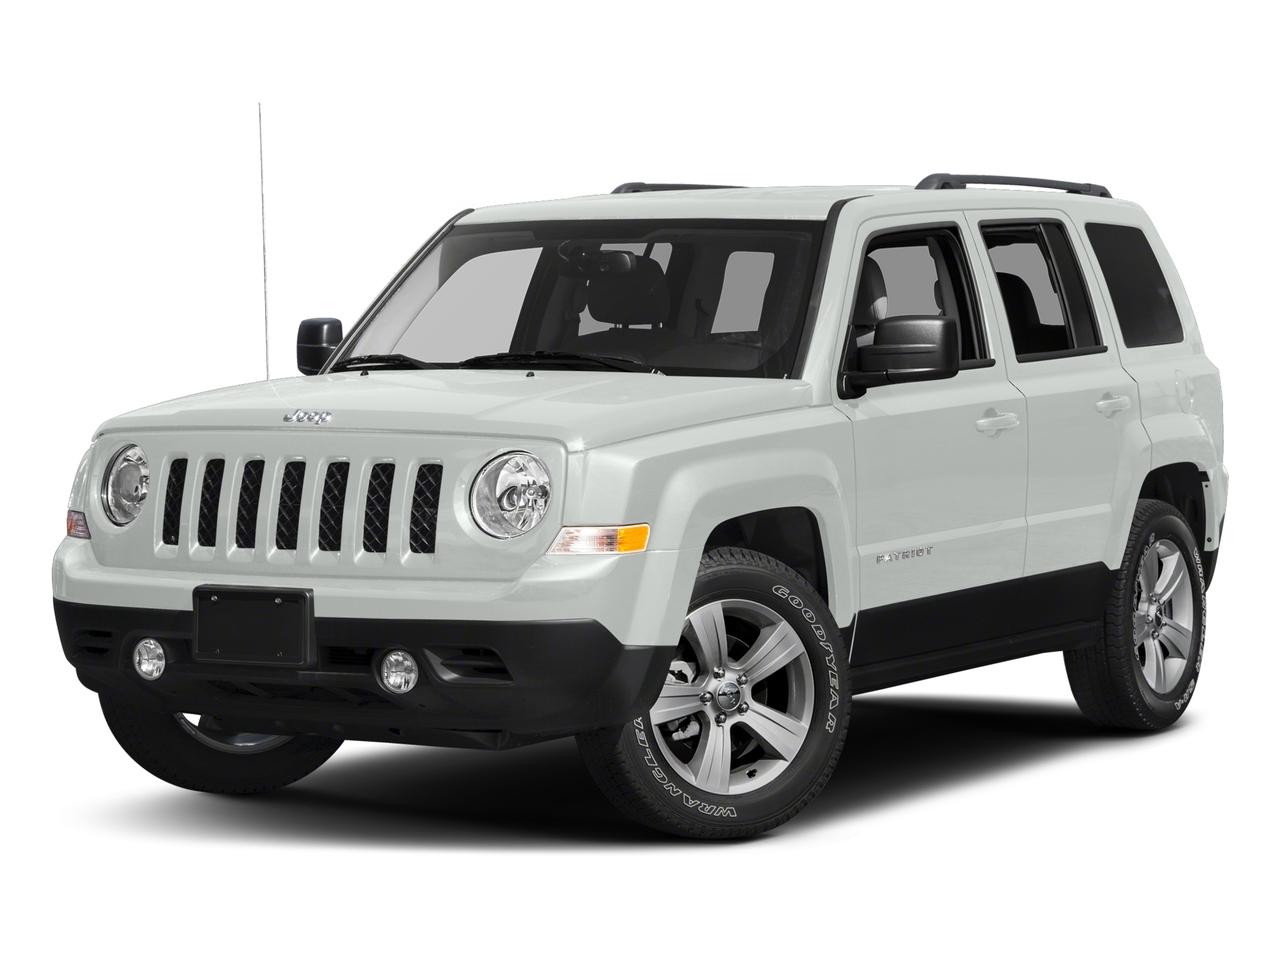 Used 2017 Jeep Patriot Sport FWD in Bright White for sale ...